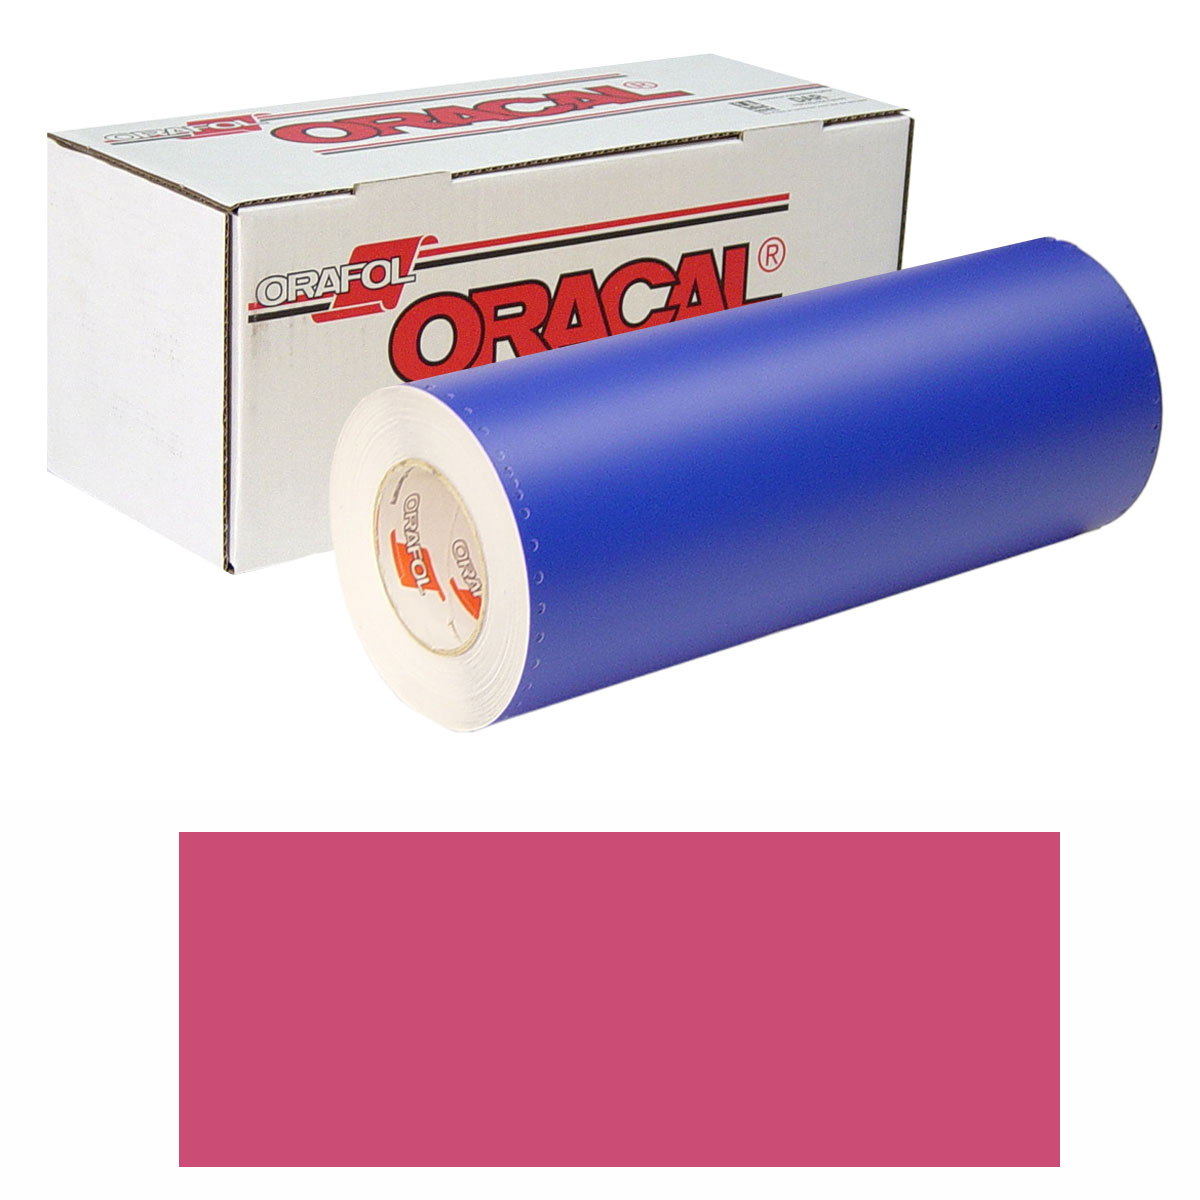 ORACAL 8300 30in X 10yd 031 Red